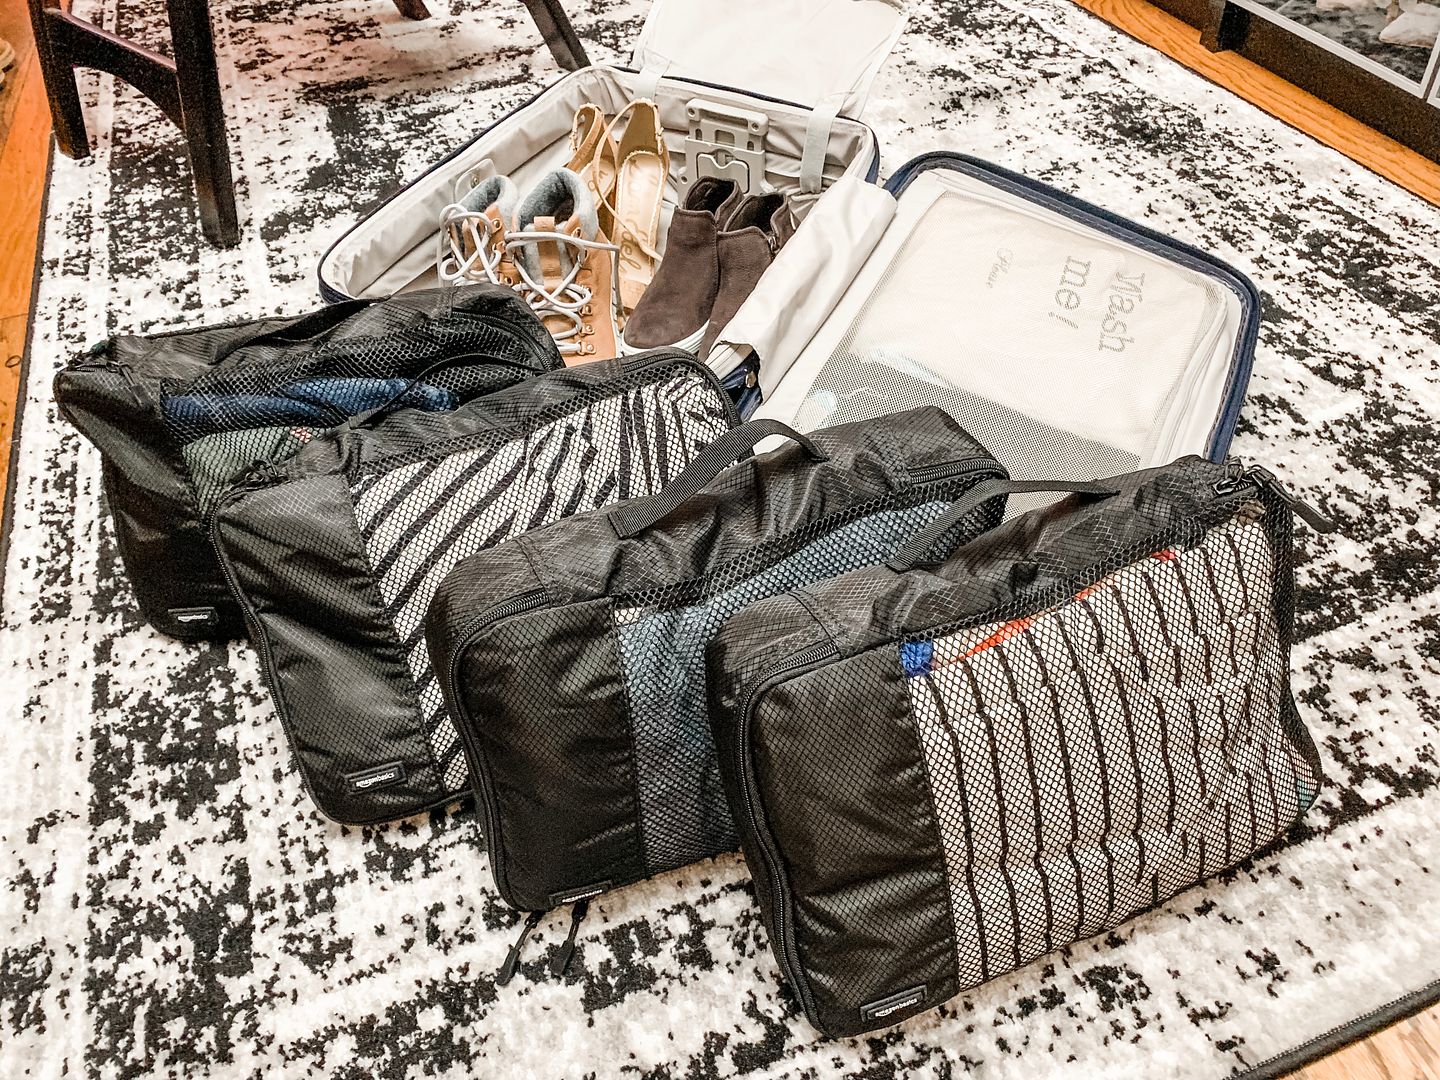 Do packing cubes really save space?